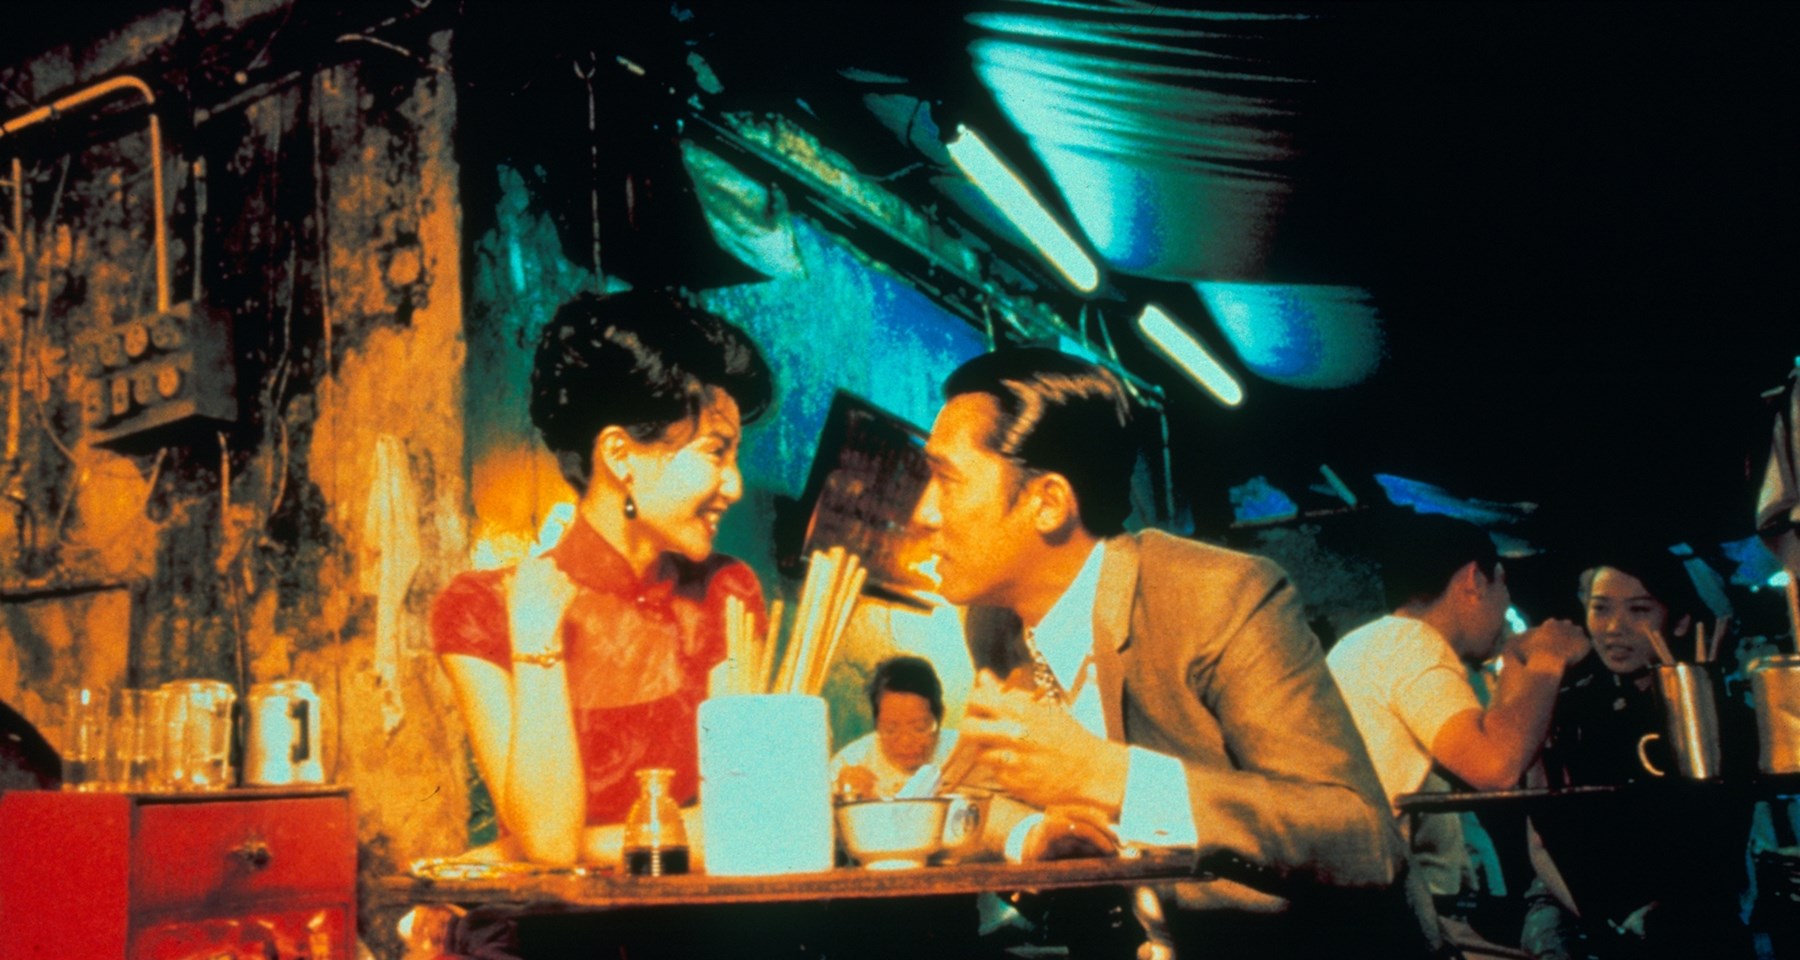 Featured image for “In The Mood For Love”